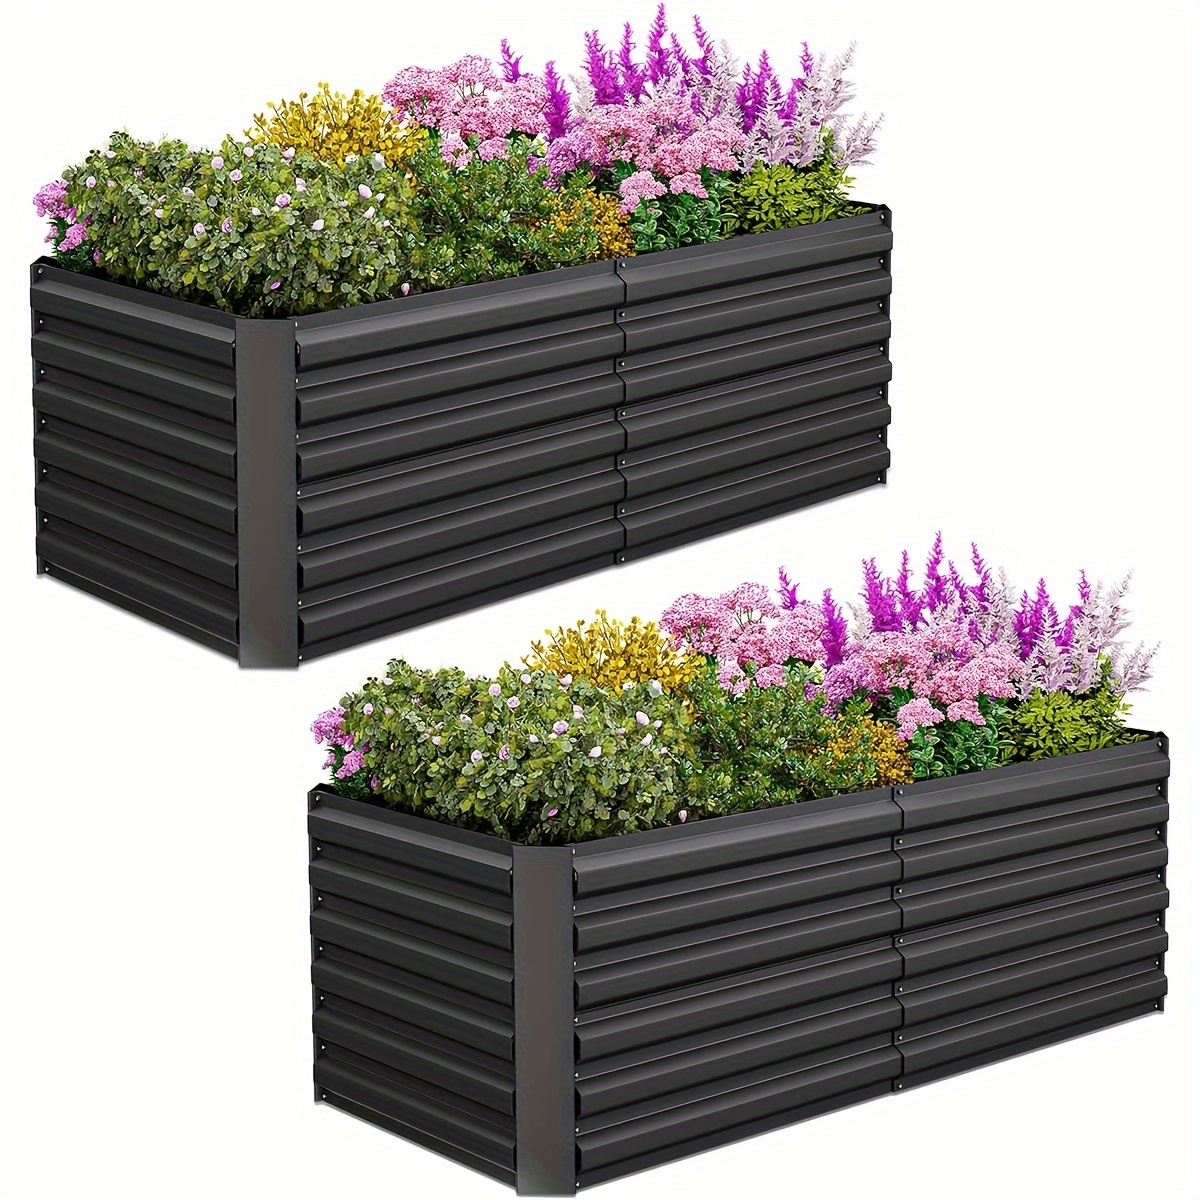 

6x3x2 Ft Raised Garden Bed, Large Metal Planter Raised Beds, Planters For Outdoor Plants For Vegetables, Flowers, Herbs, Fruits, And Succulents.(2 Pcs)